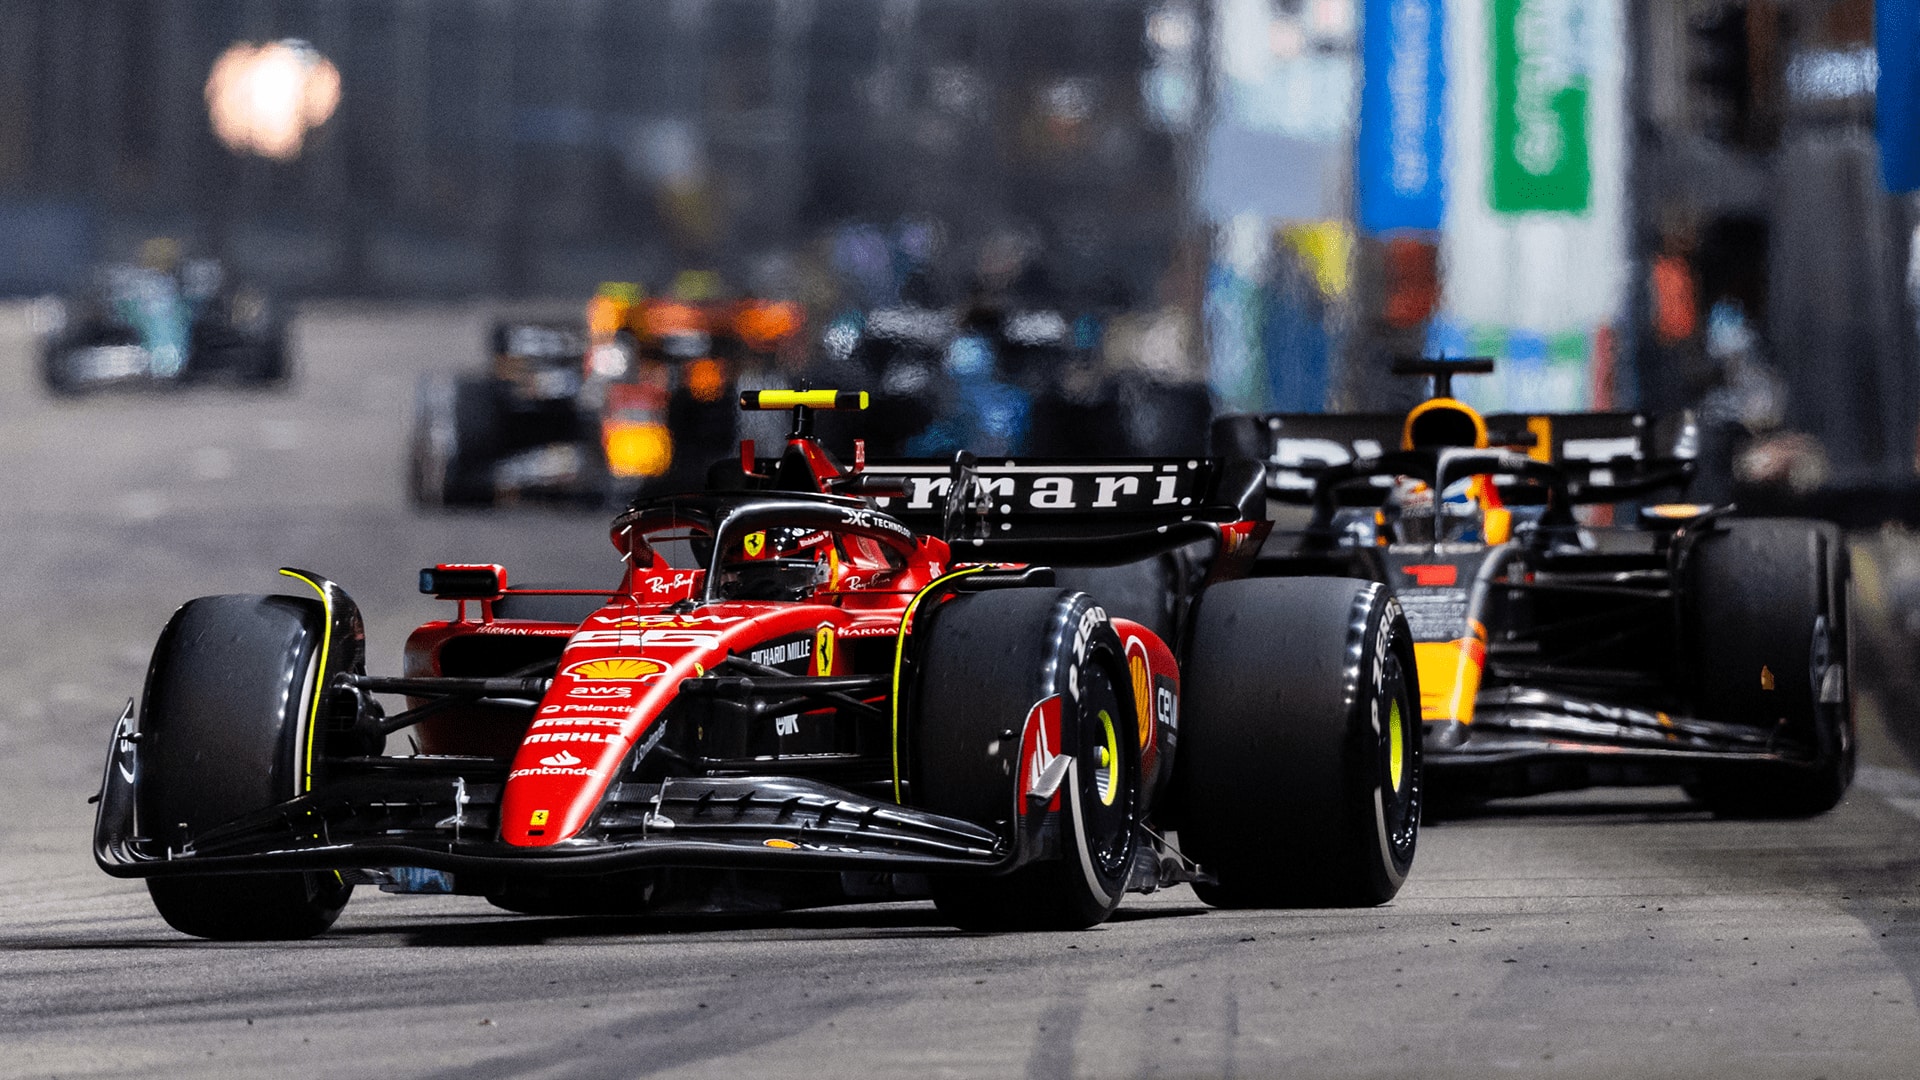 Formula 1 collaborates with Amazon for AI-enhanced race viewing experience